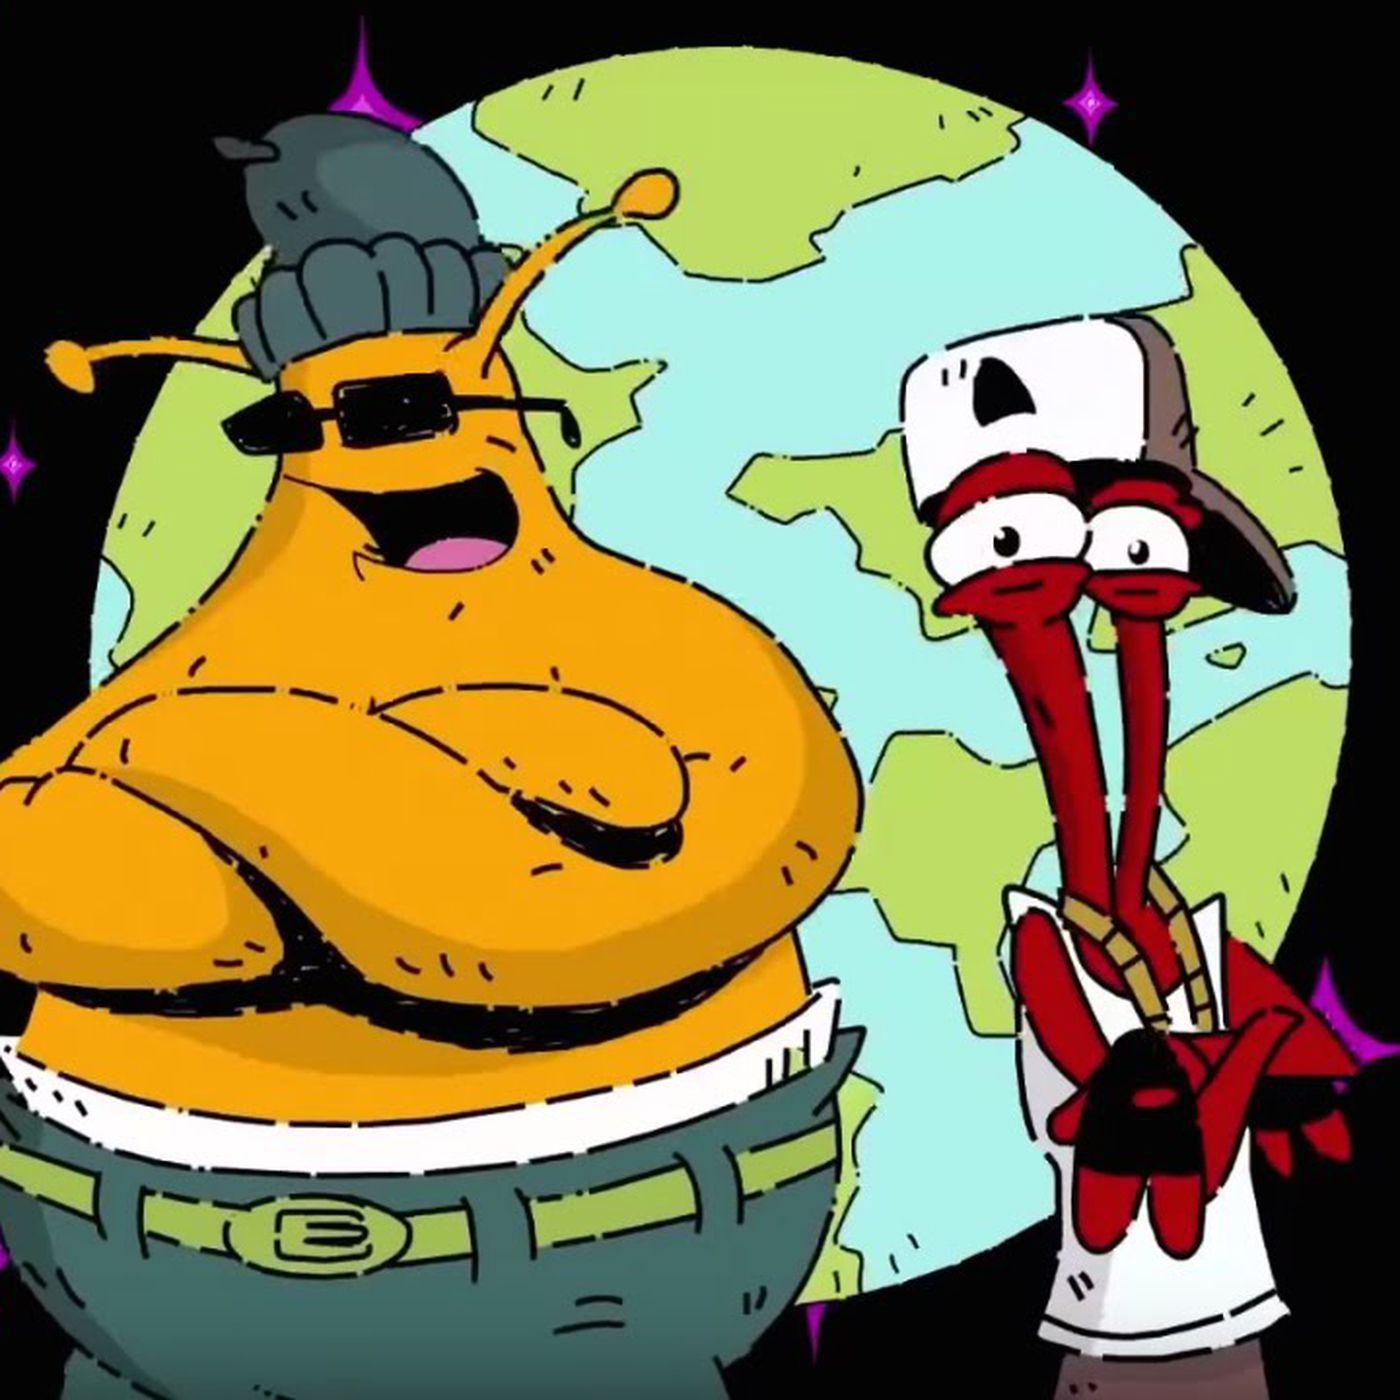 ToeJam & Earl's new game pushed into 2018